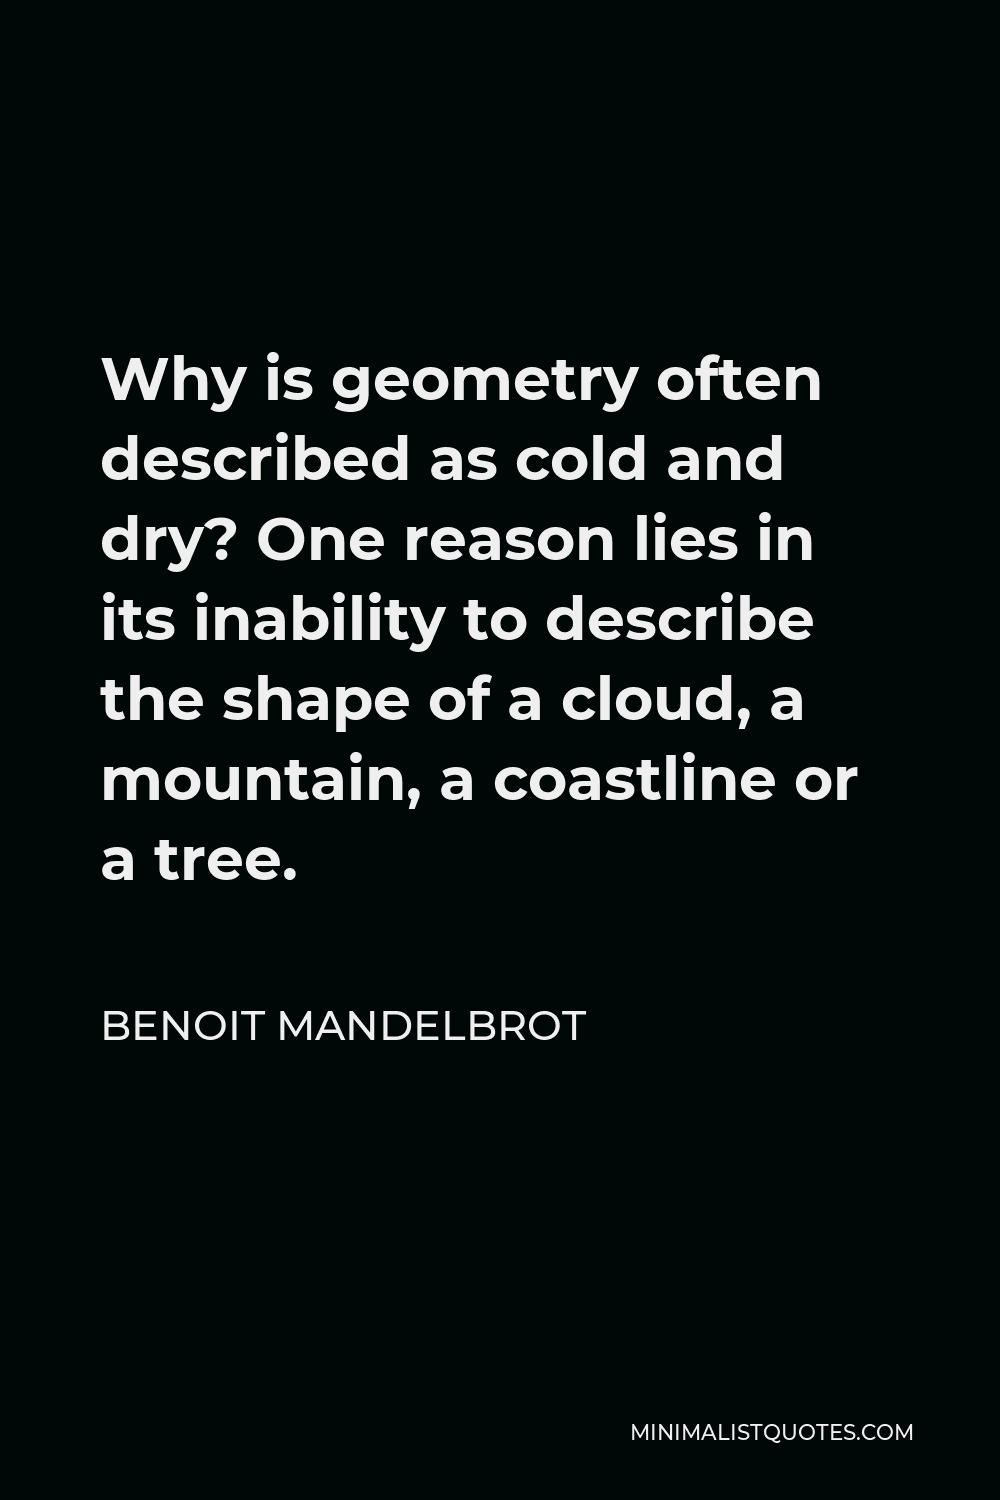 Benoit Mandelbrot Quote - Why is geometry often described as cold and dry? One reason lies in its inability to describe the shape of a cloud, a mountain, a coastline or a tree.